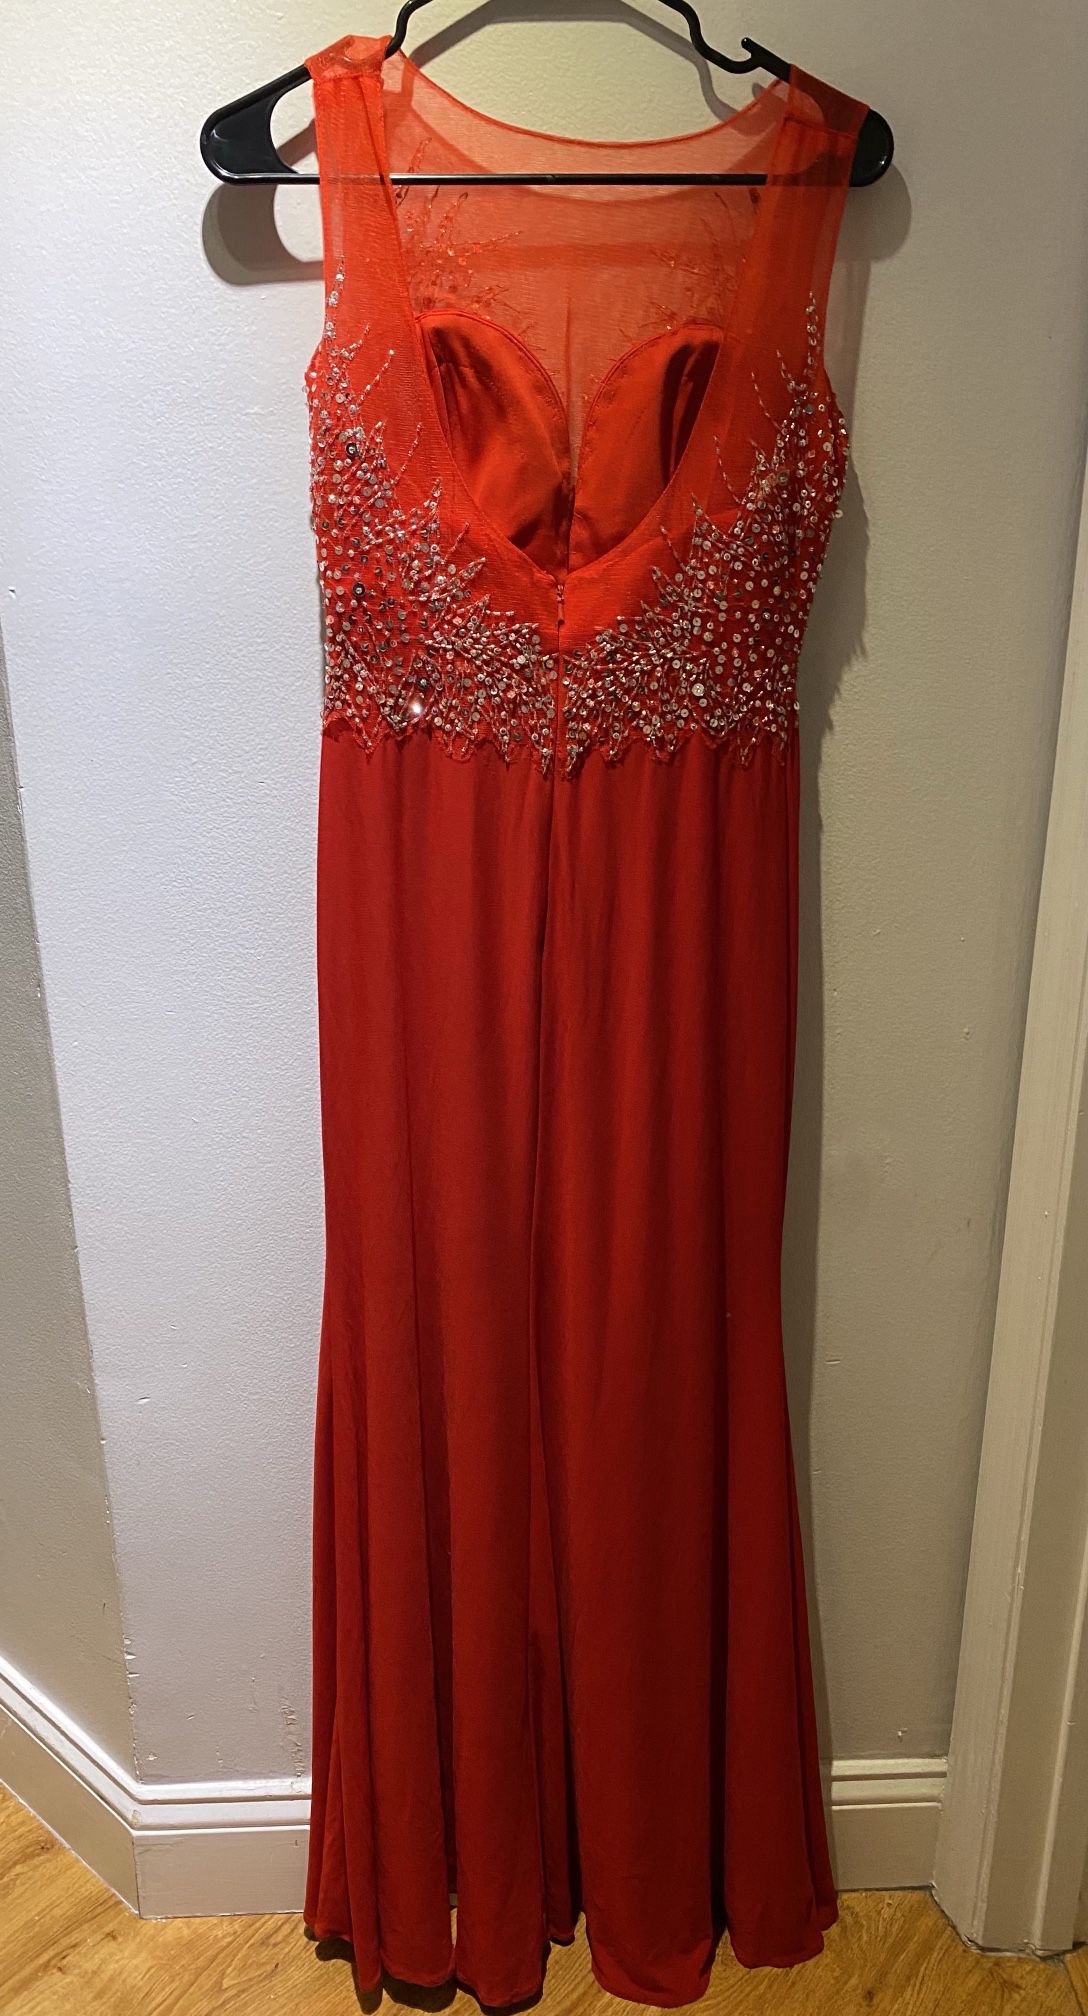 Prom dress, evening gown